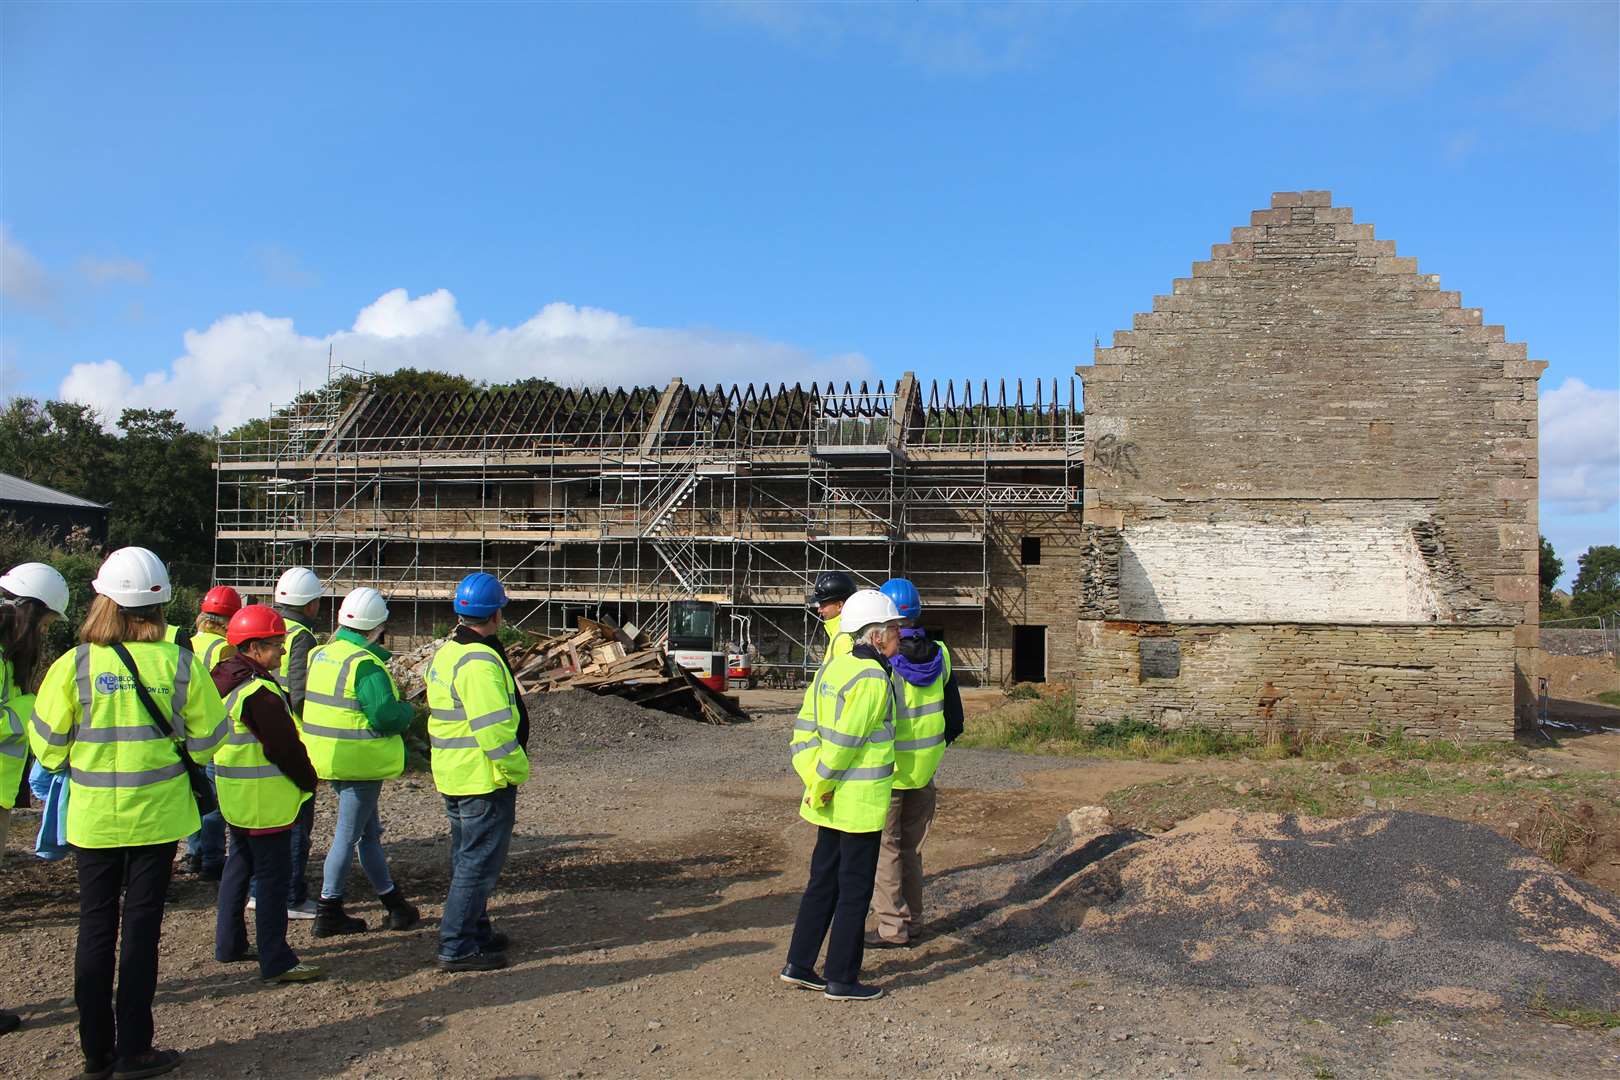 The group takes a tour of the site to learn more about the mill. Picture: John Davidson